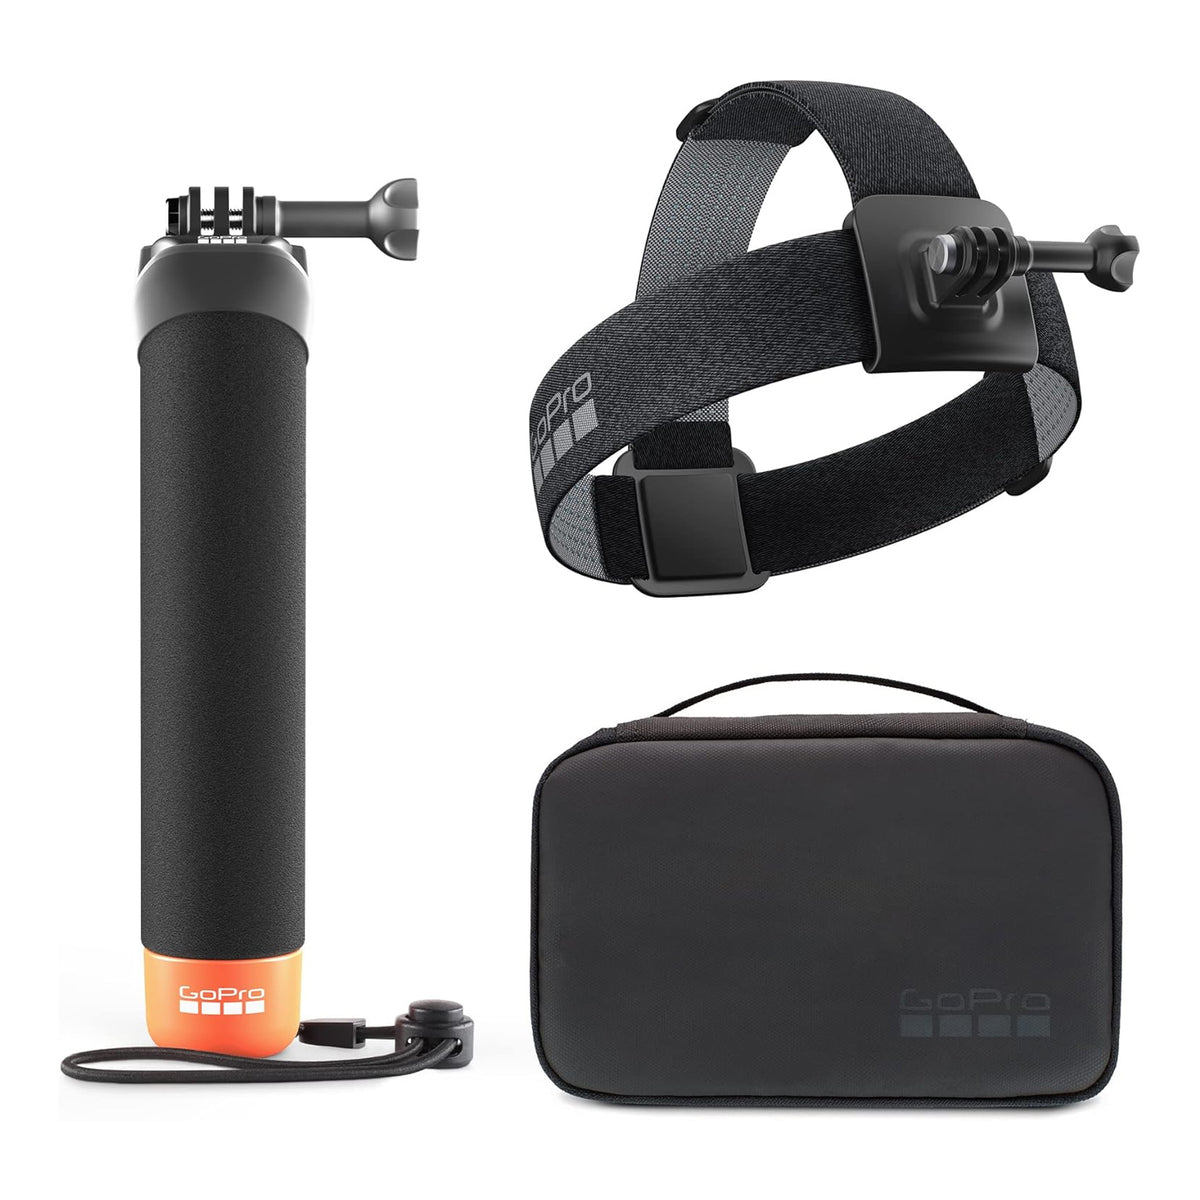 GoPro Adventure Kit 3.0 wth Head Strap 2.0 + Clip, The Handler (Floating Hand Grip) & Compact Case